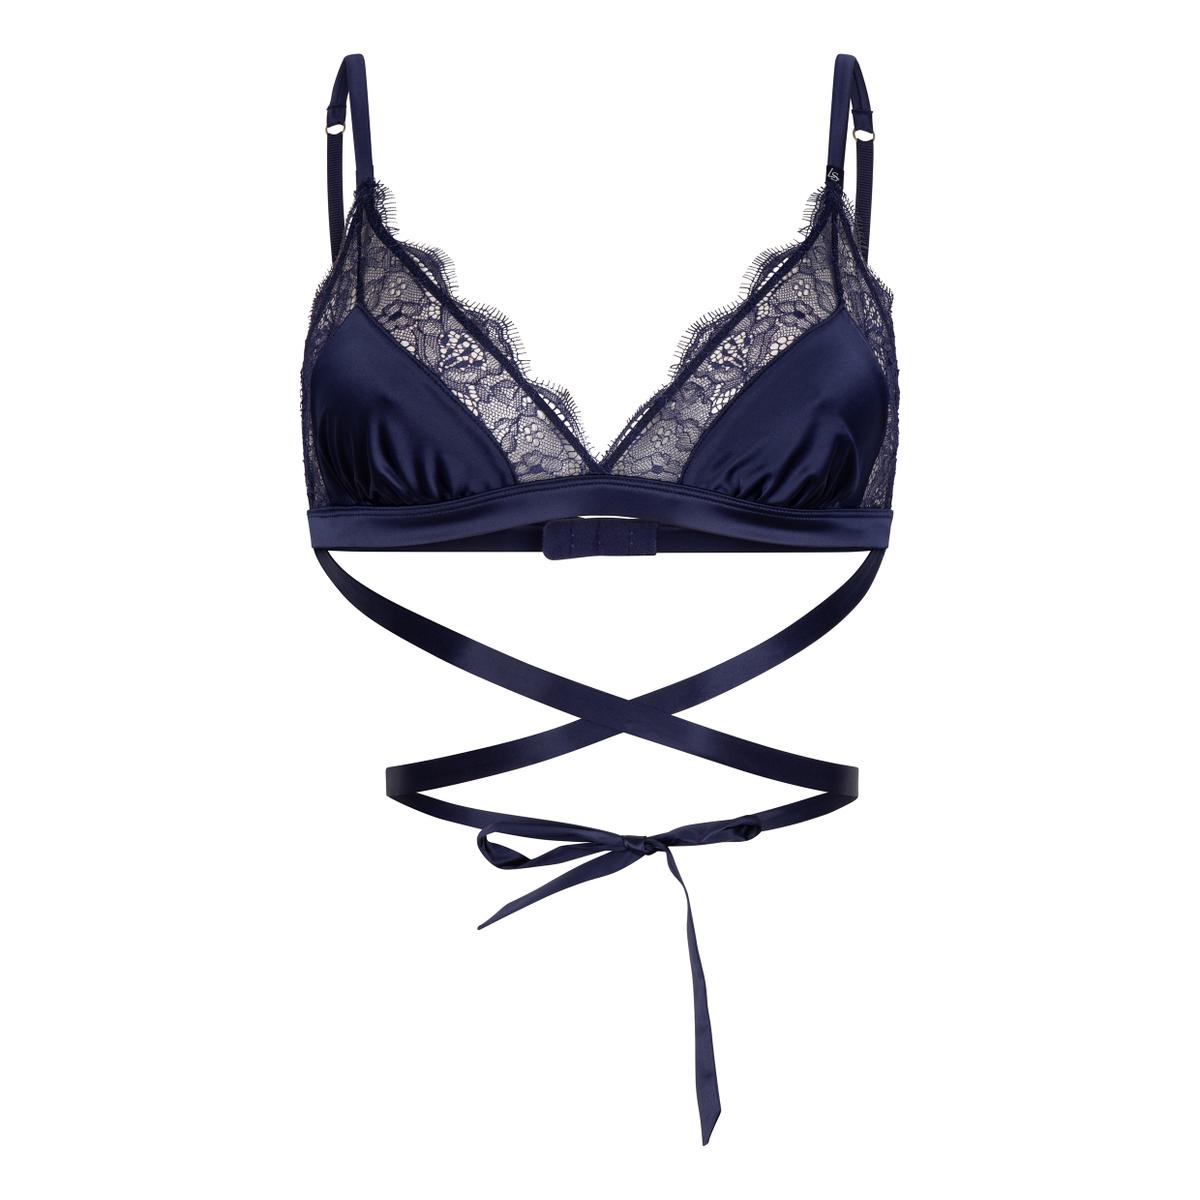 Love & Other Things lace lingerie set in cobalt blue